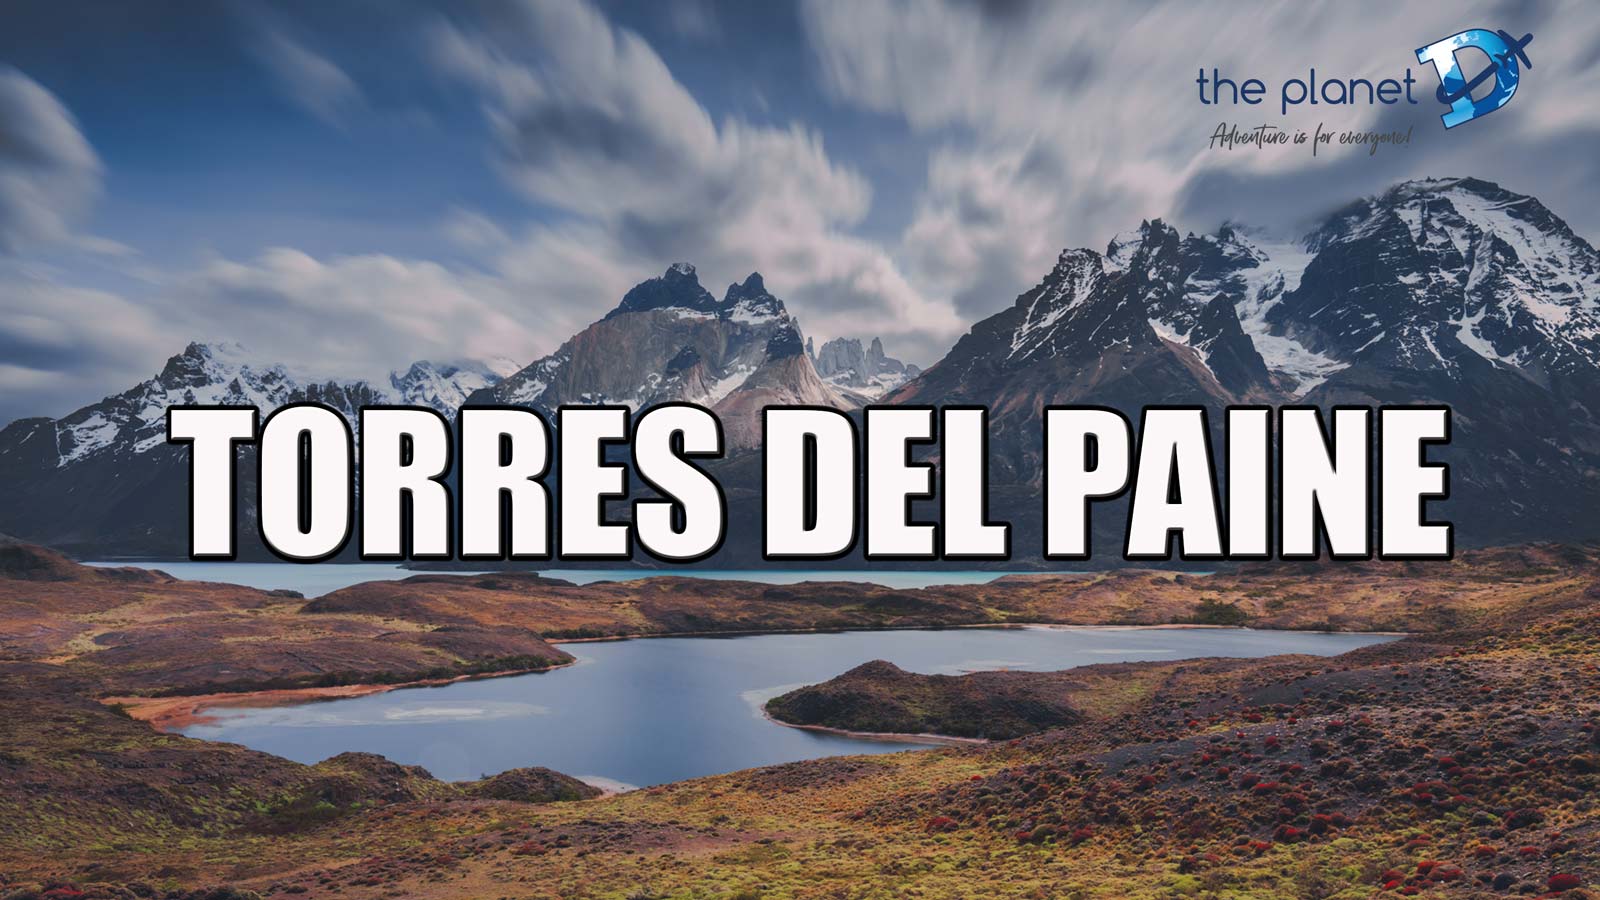 south america facts video of torres del paine